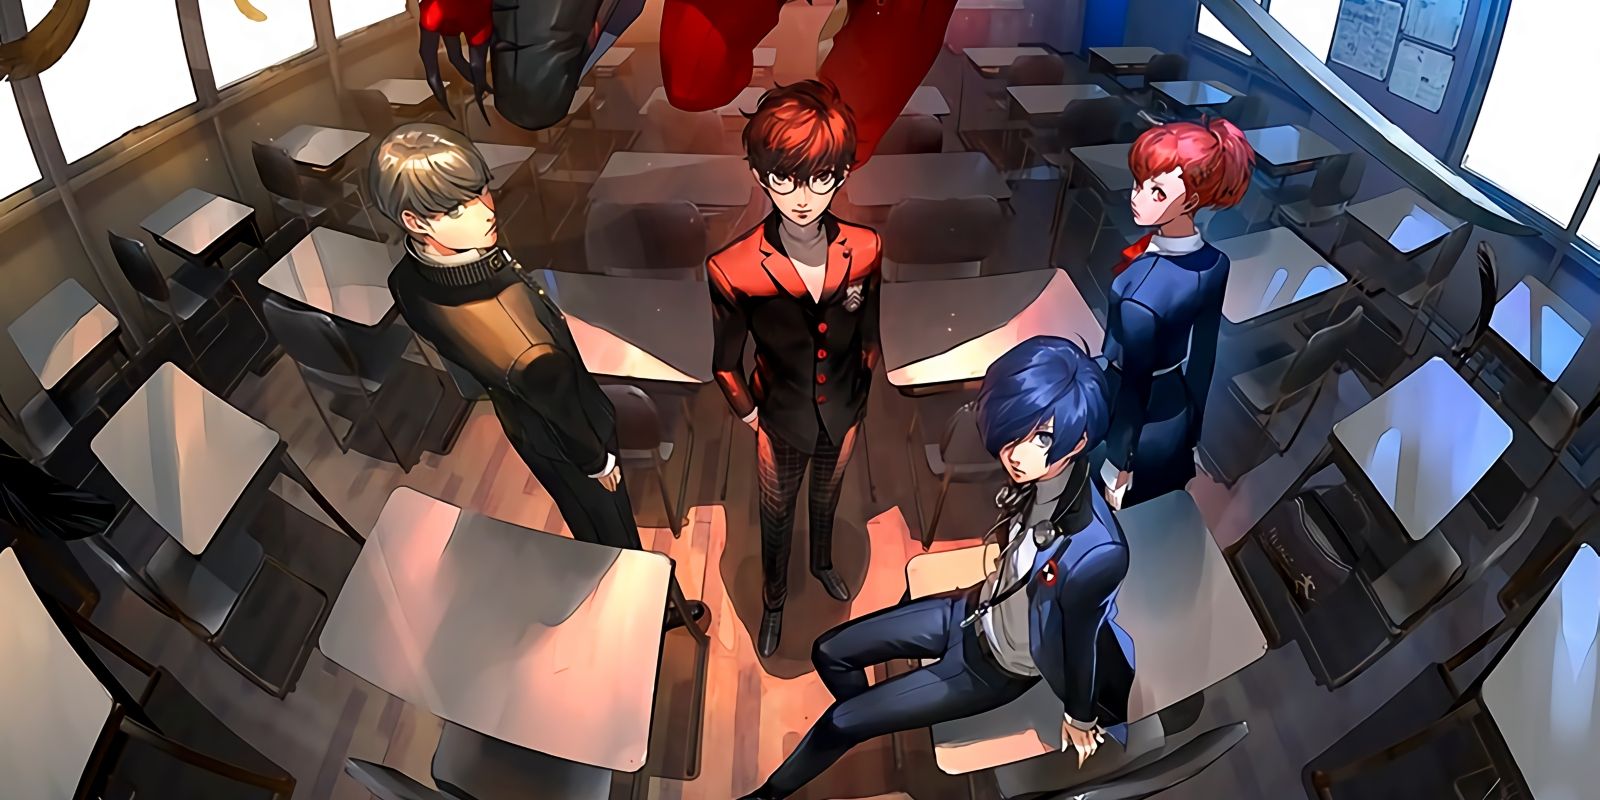 official artwork of the main character's of Persona 3, Persona 4, and Persona 5, including P3P's female protagonist